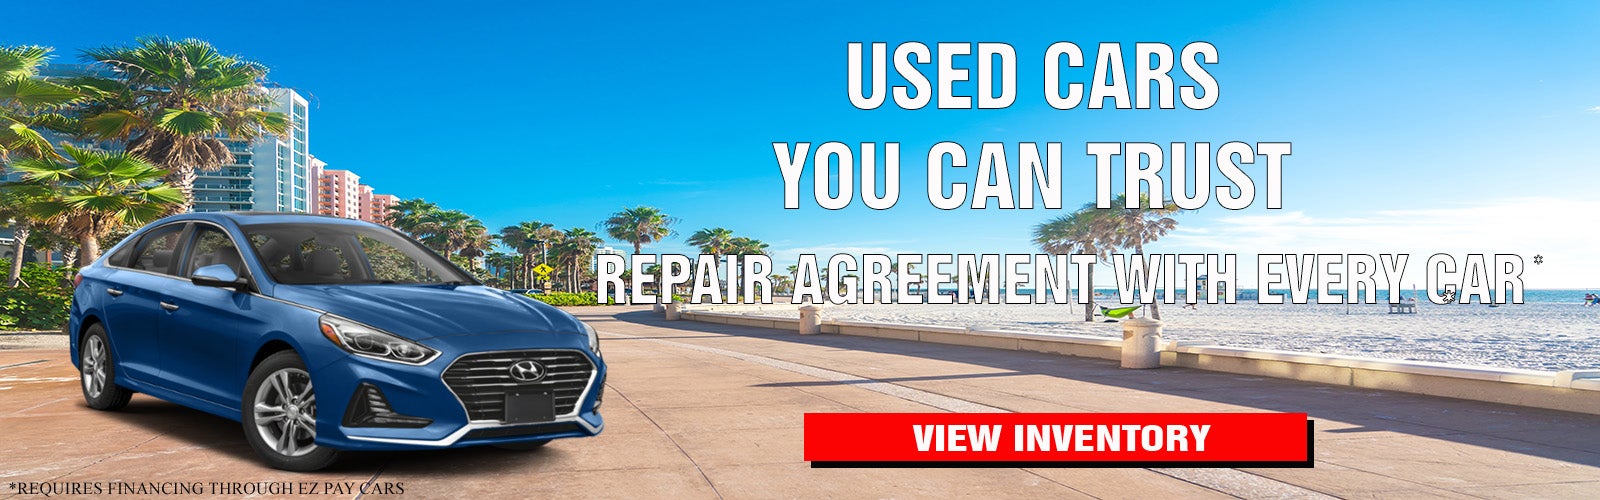 Used Cars You Can Trust